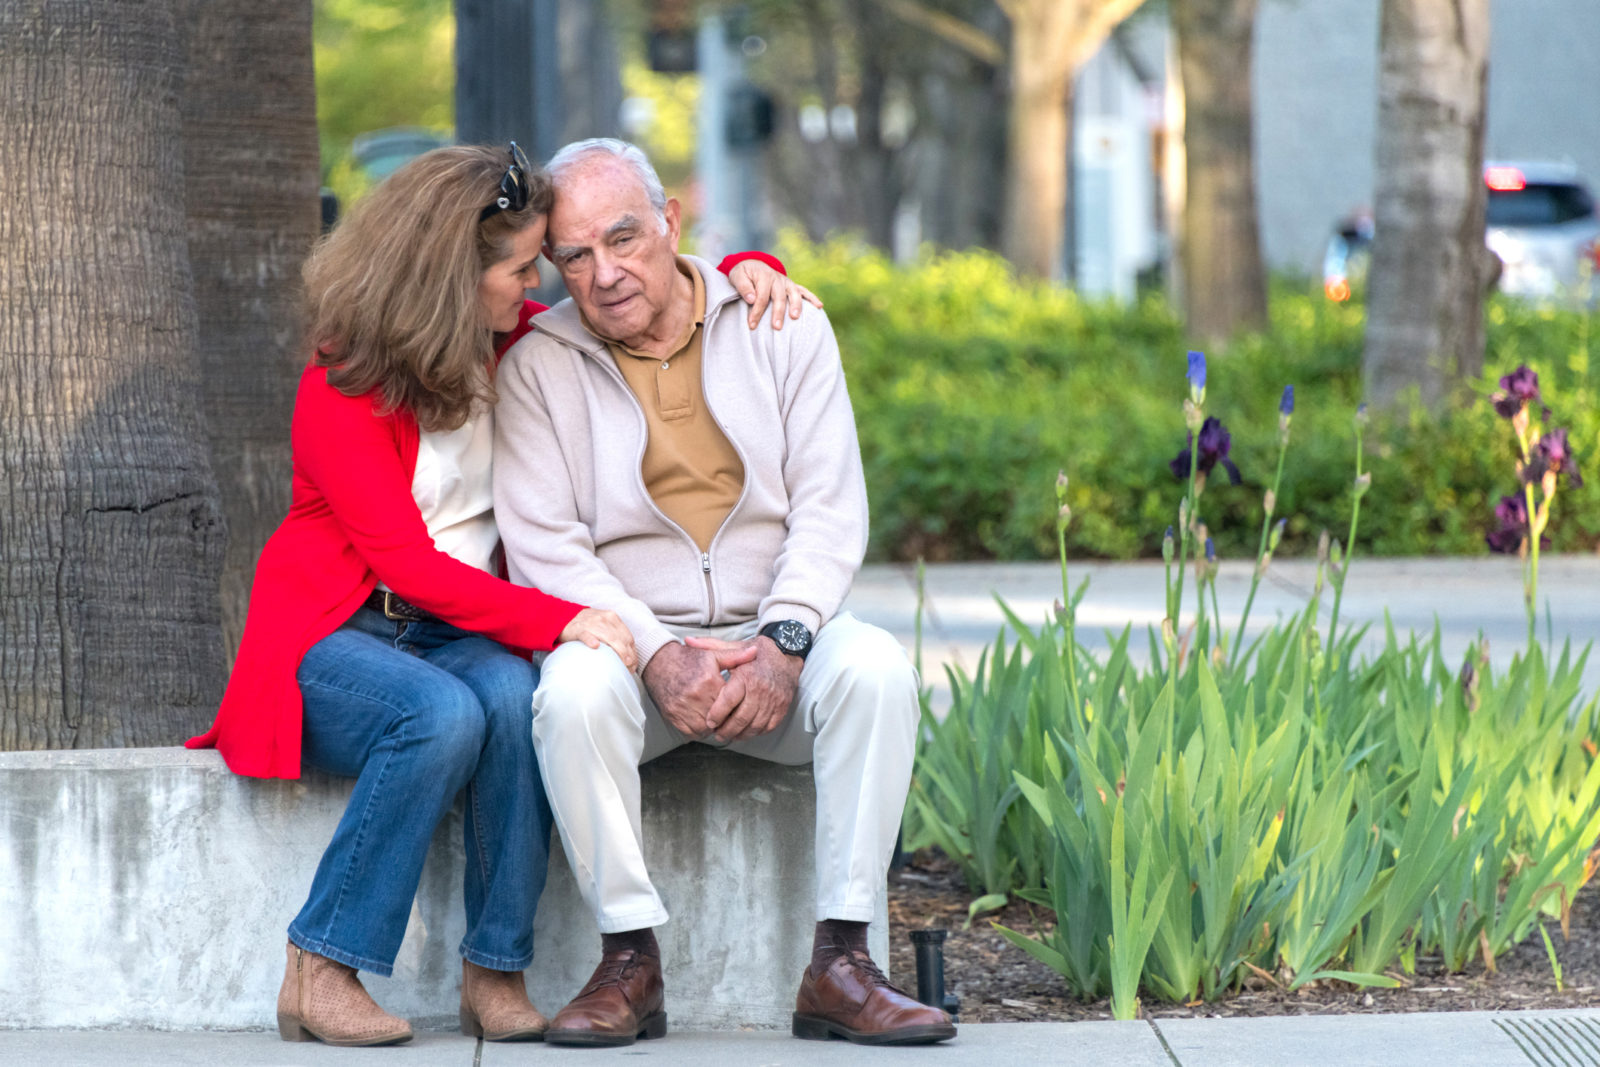 senior man with dementia being comforted by daughter in outdoor setting